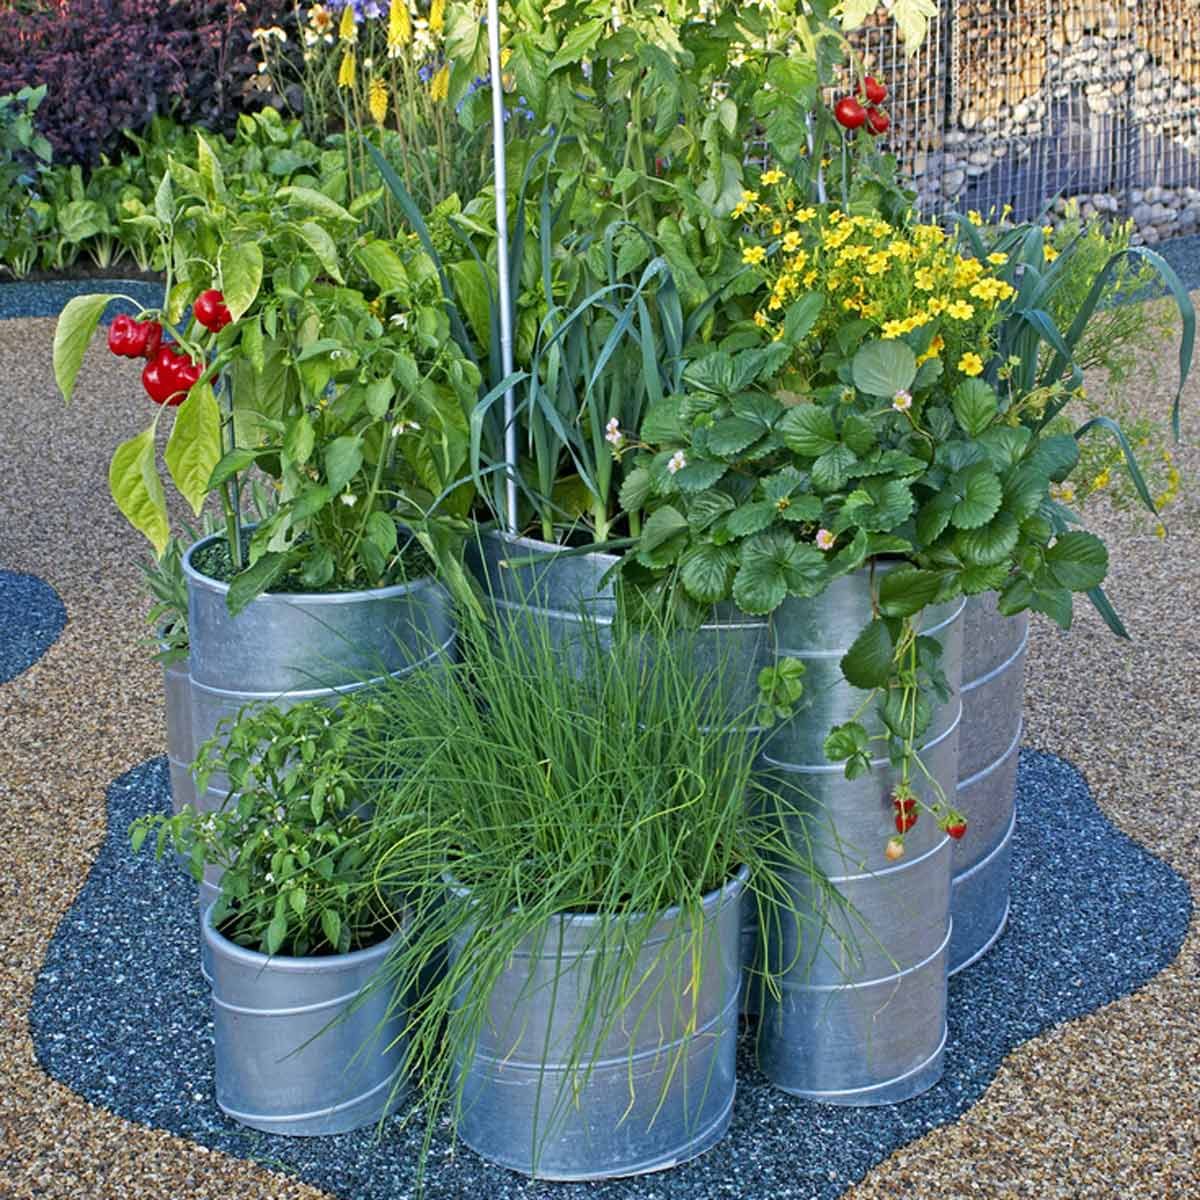 A Dozen Vegetables You Can Grow in Pots - Global Recipe